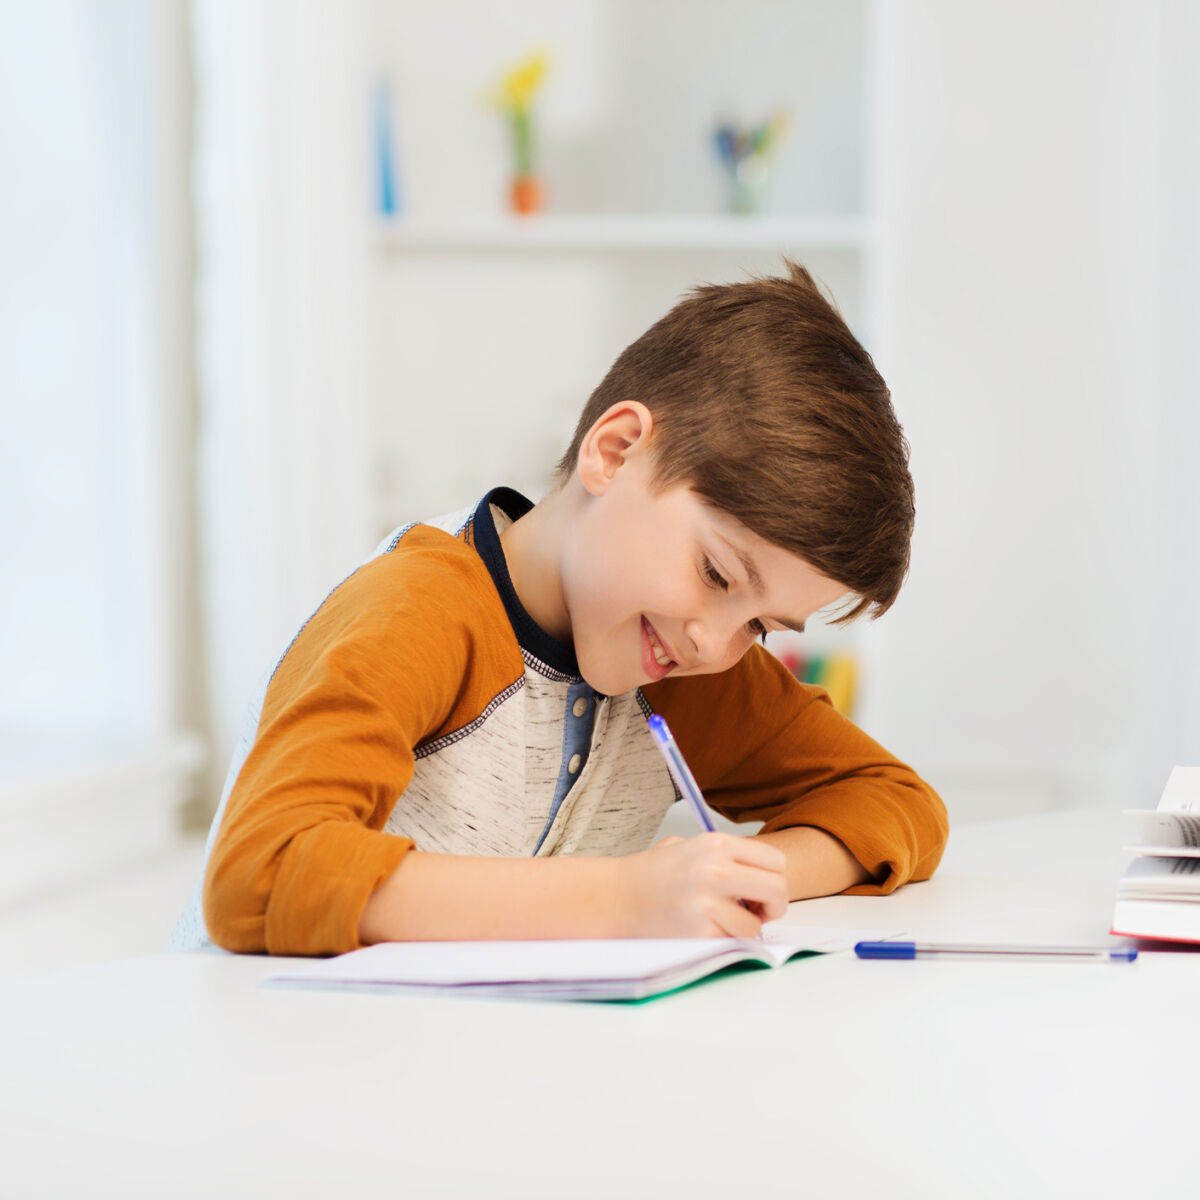 smiling student boy writing to notebook at home